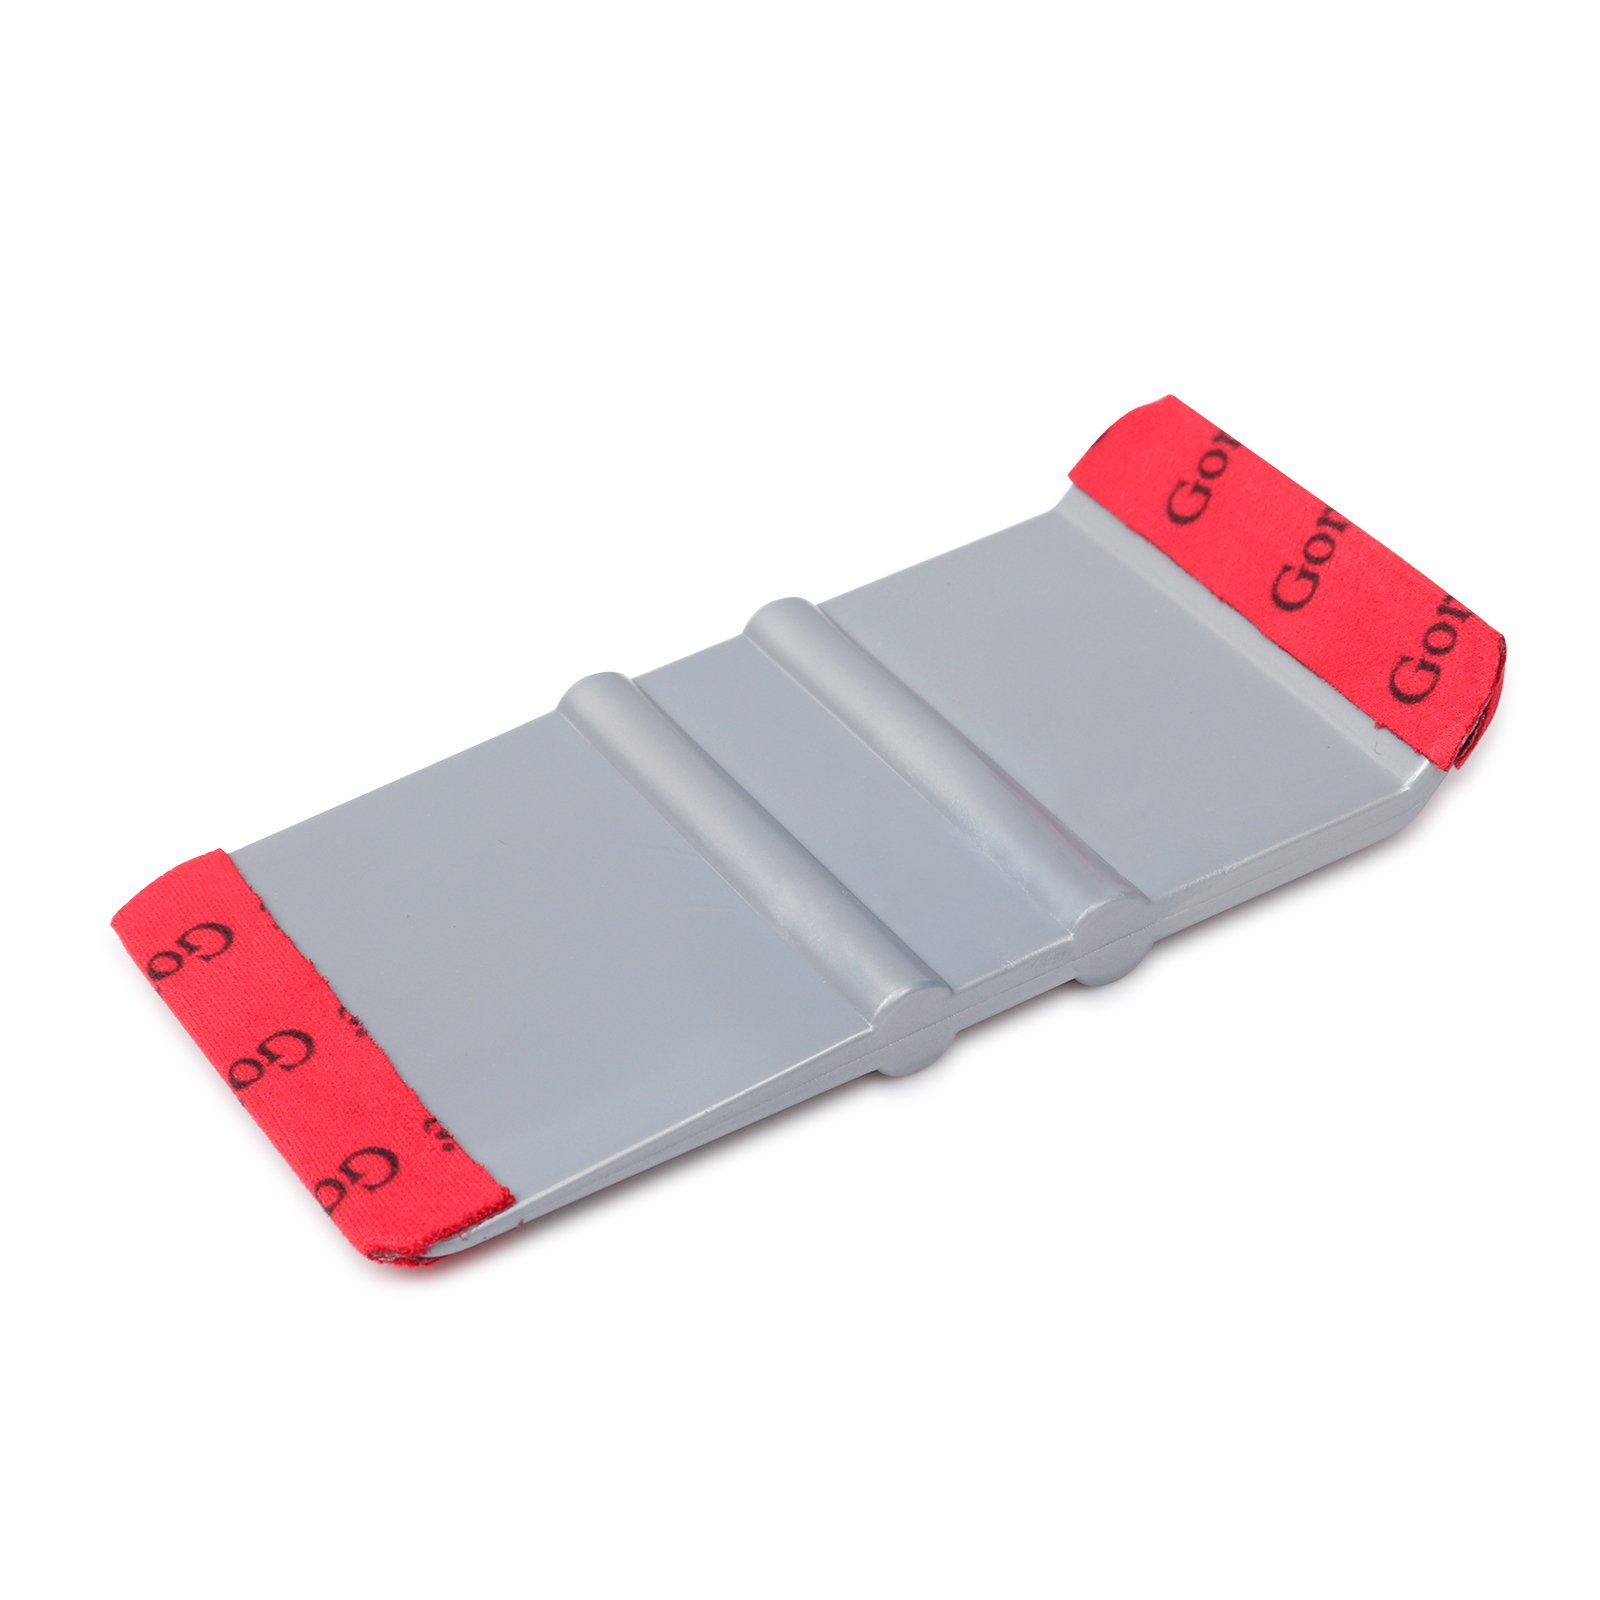 2'' x 3-1/2'' Gray 135 Degree Squeegee, Medium Hardness with Red Felt For Film and Vinyl Tucking